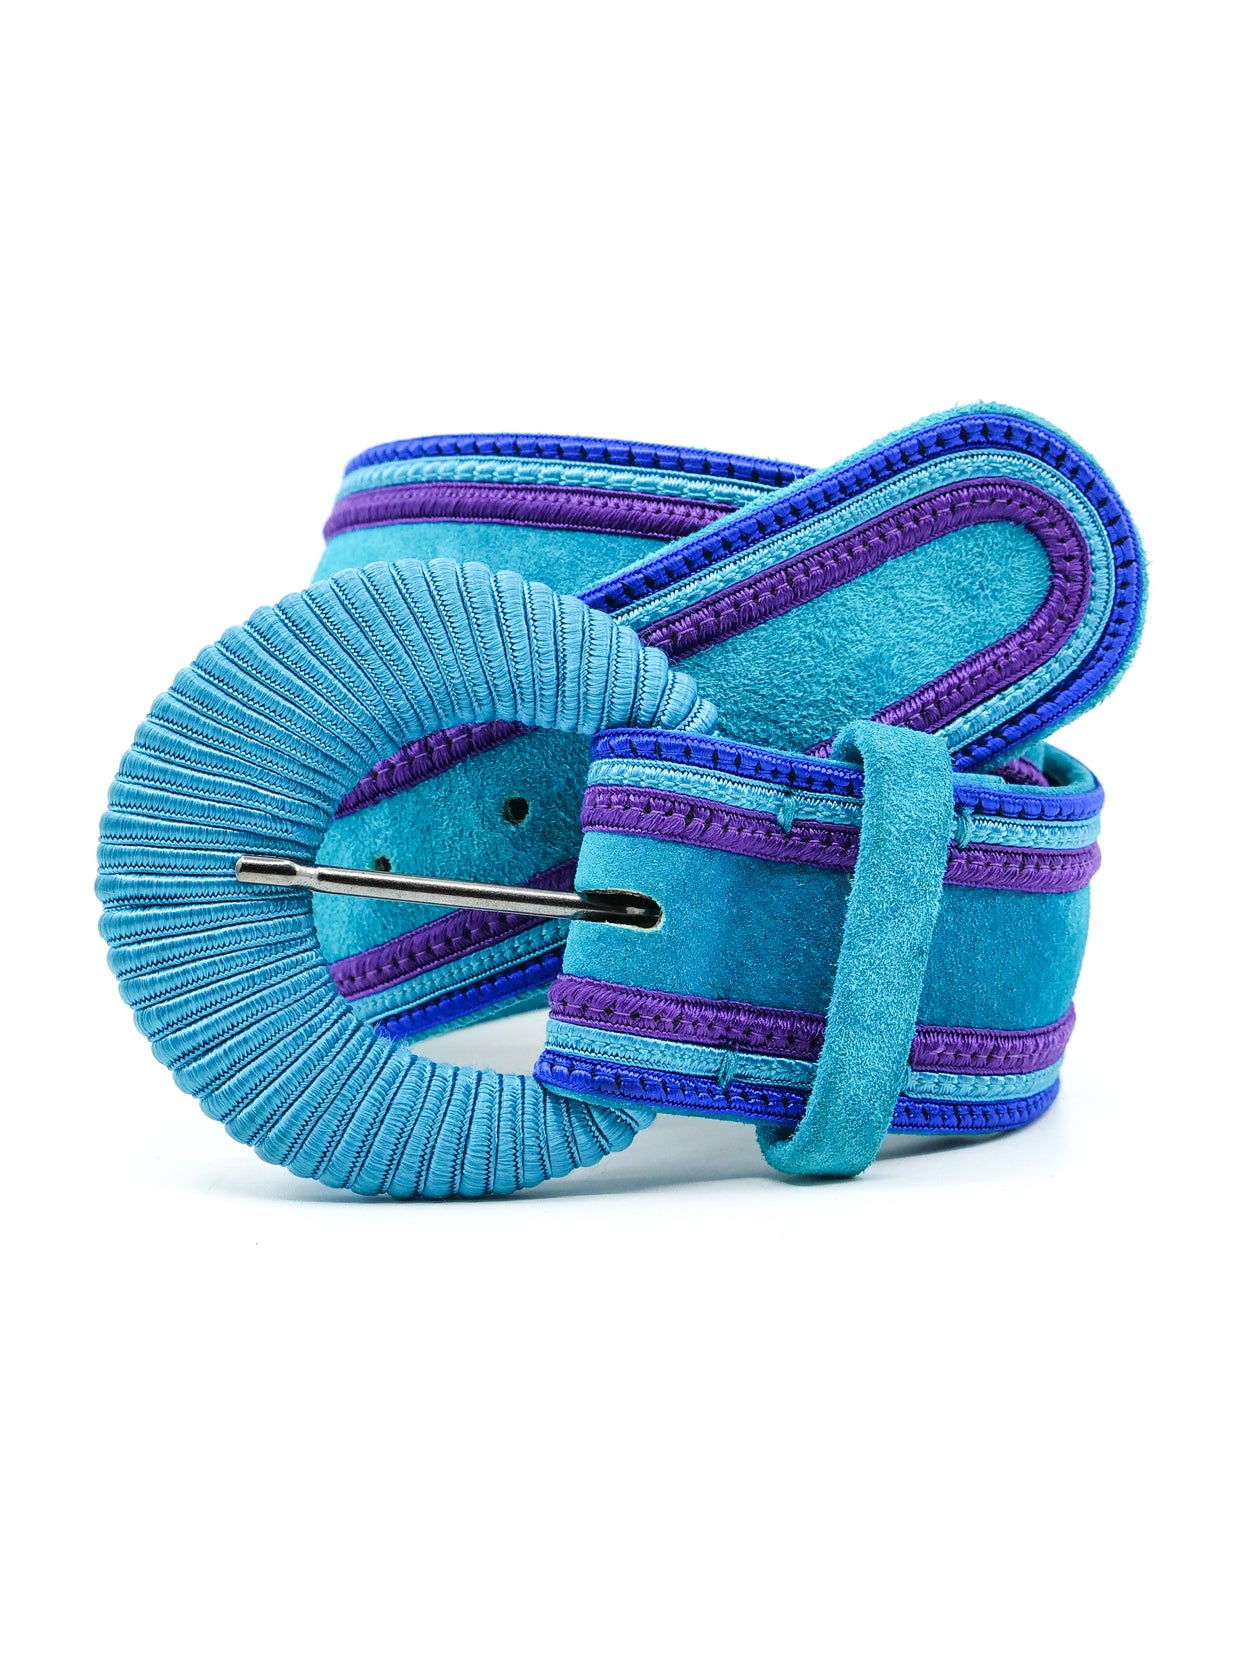 Belt Yves Saint Laurent Turquoise size 90 cm in Suede - 36134160